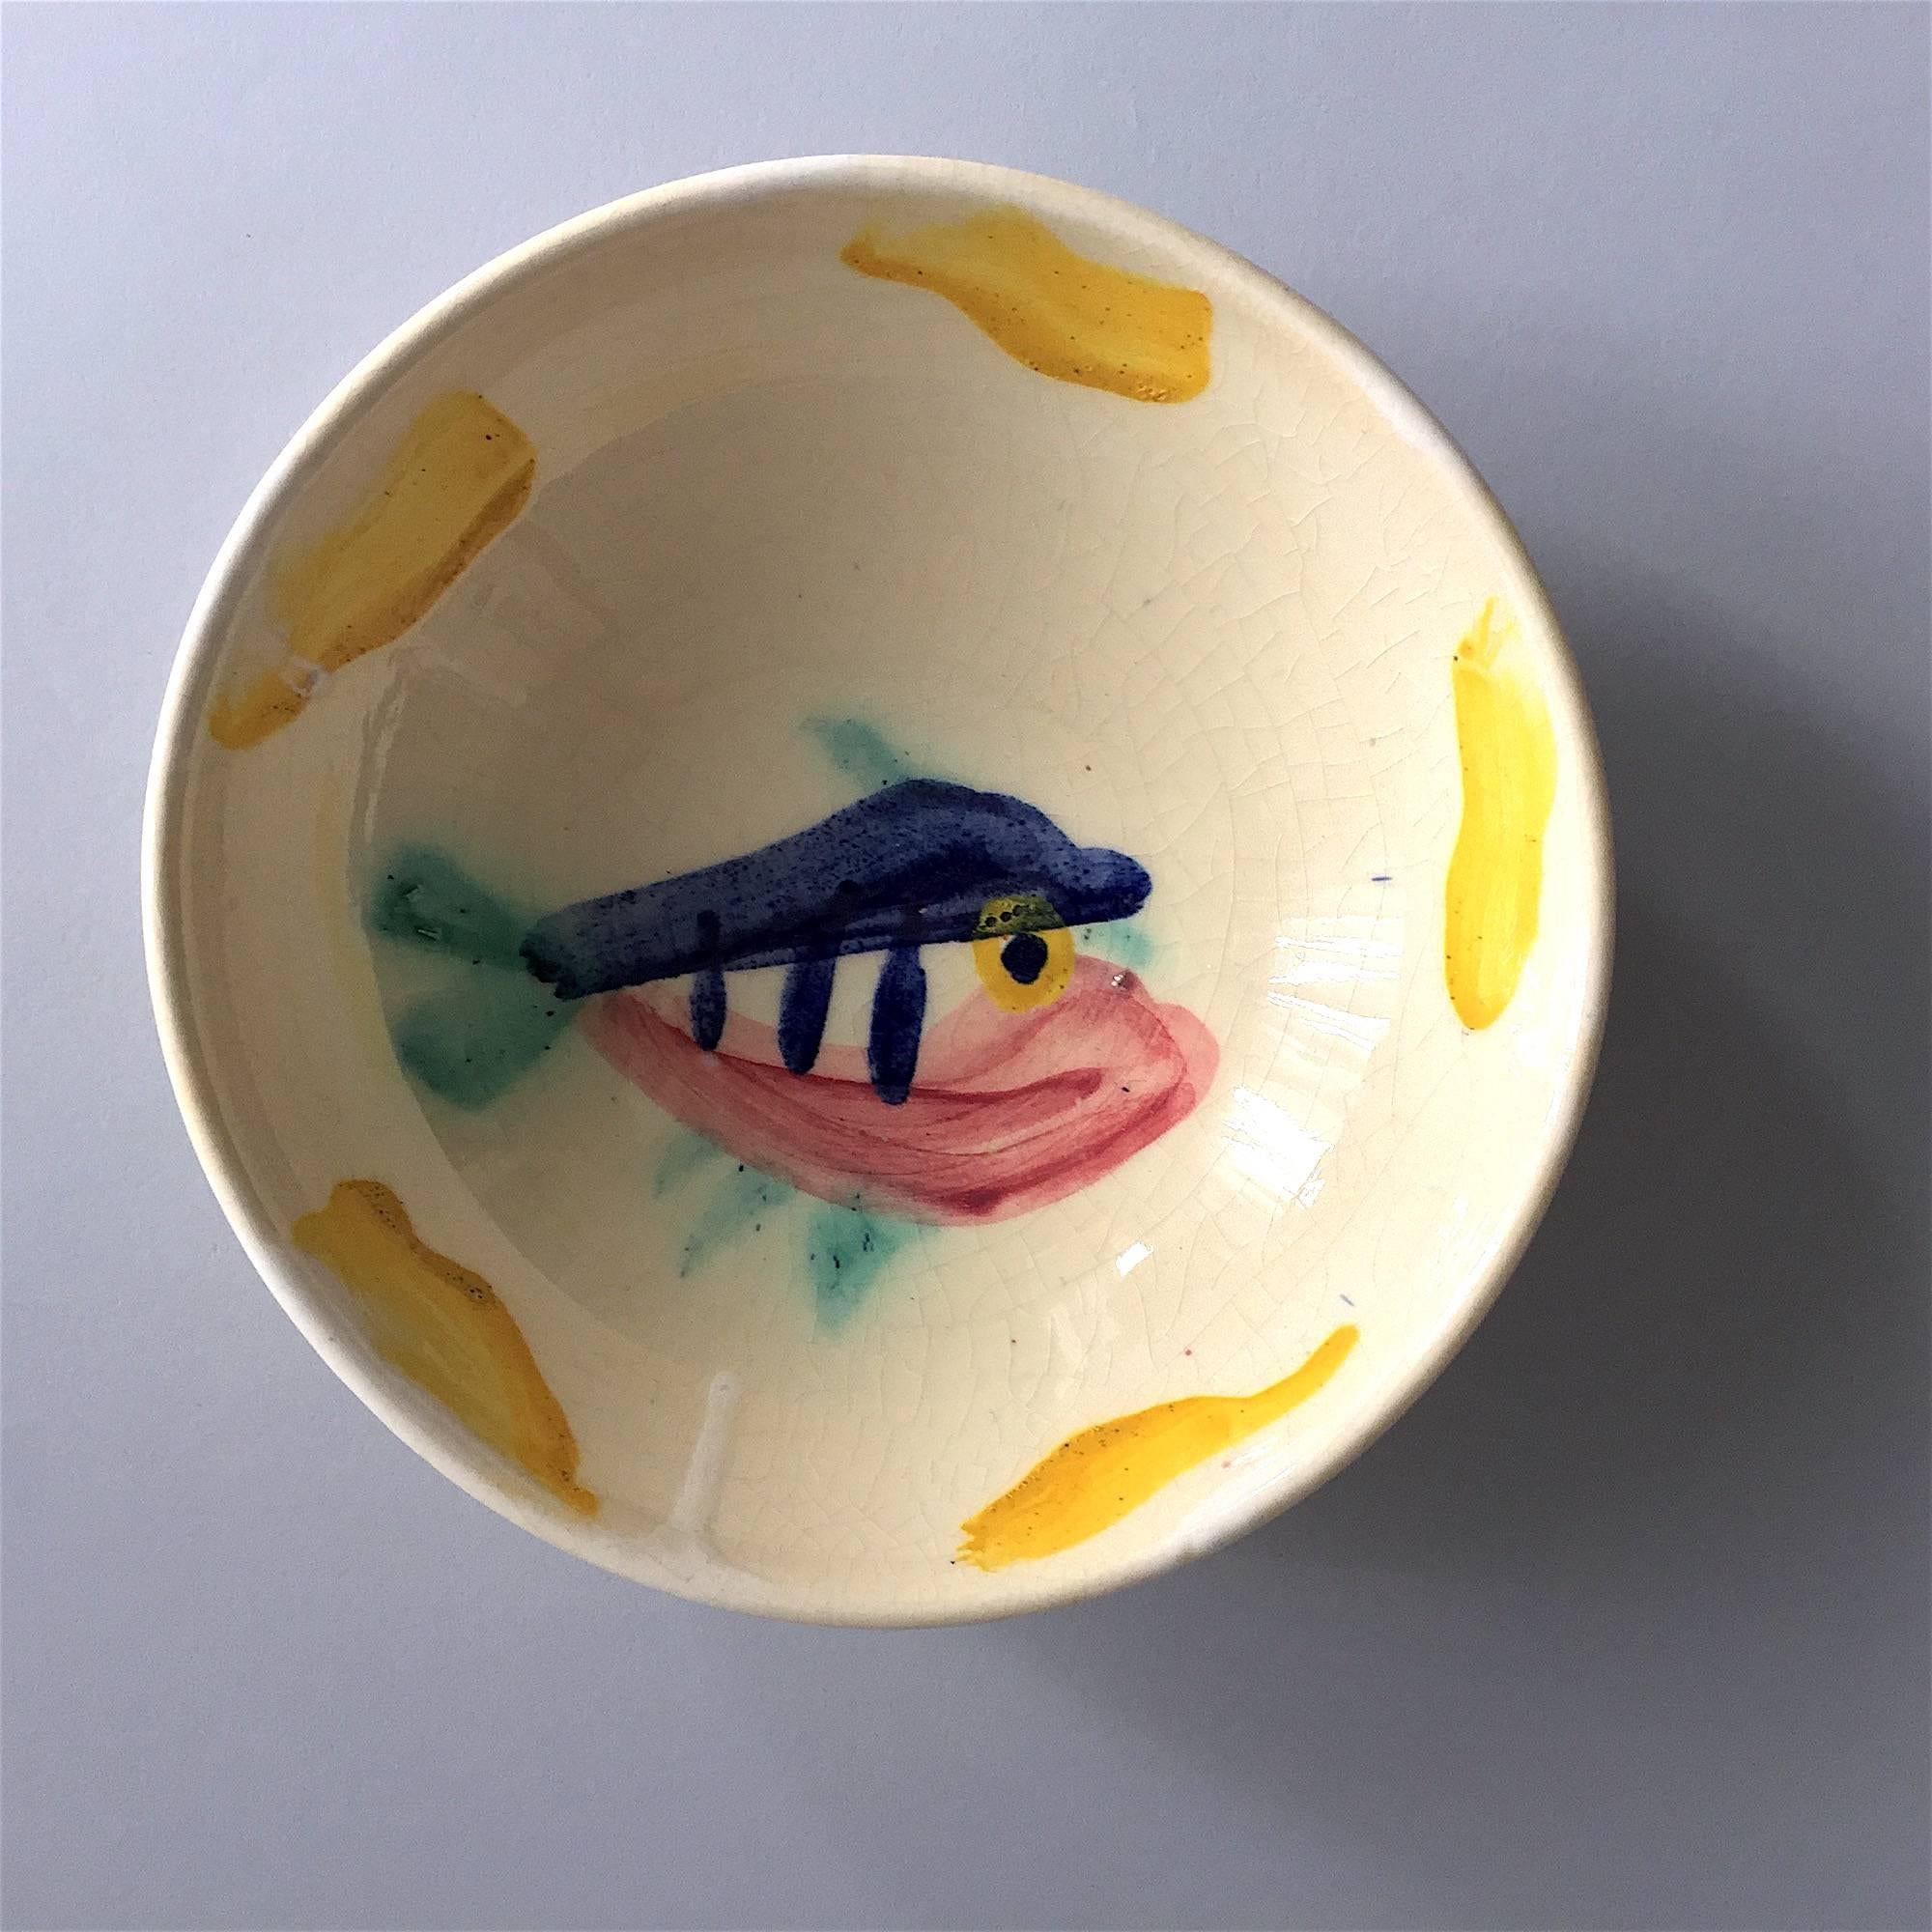 Pablo Picasso.

The fish dish or 